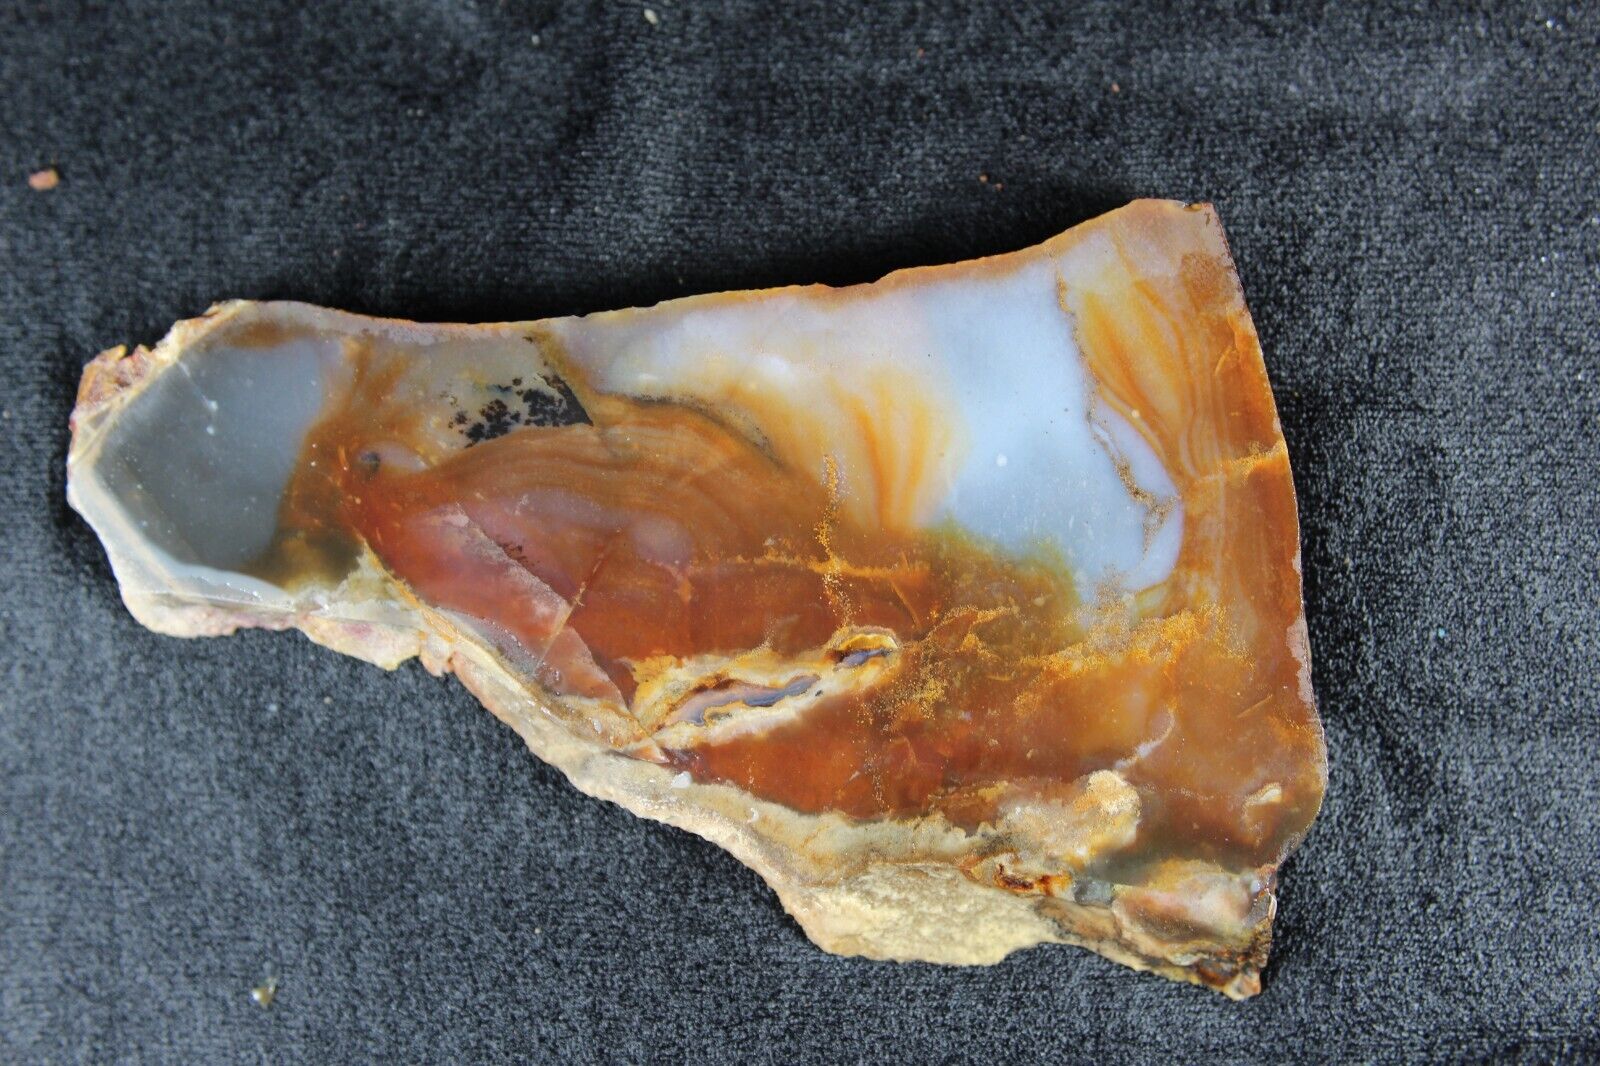 PJ:  Brown and White Agate Slab - 4.1  Ozs - Interesting 